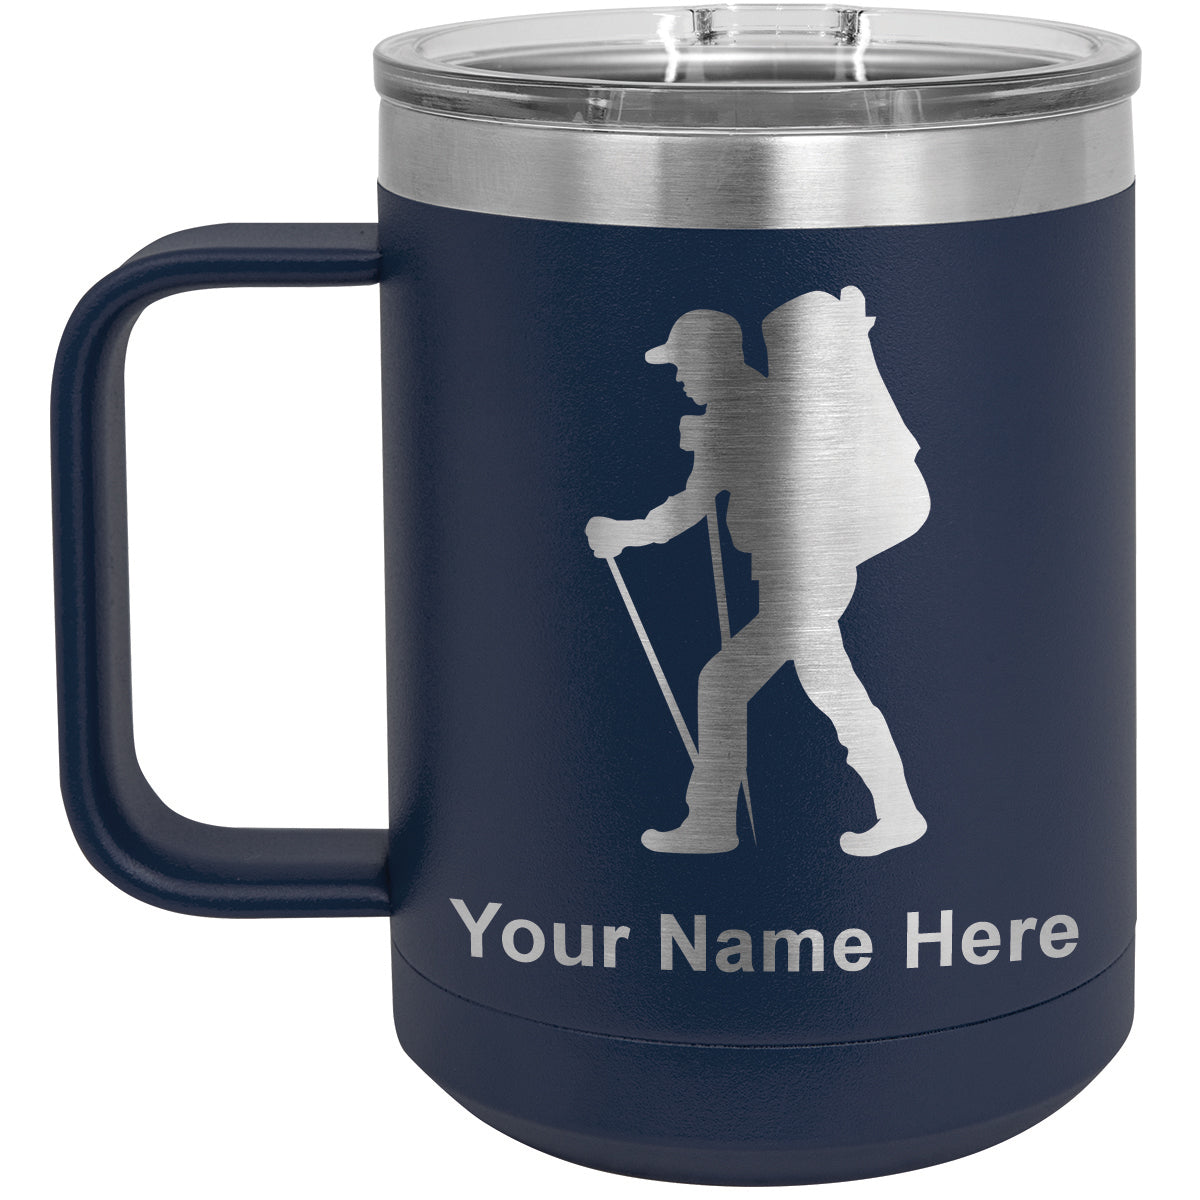 15oz Vacuum Insulated Coffee Mug, Hiker Man, Personalized Engraving Included